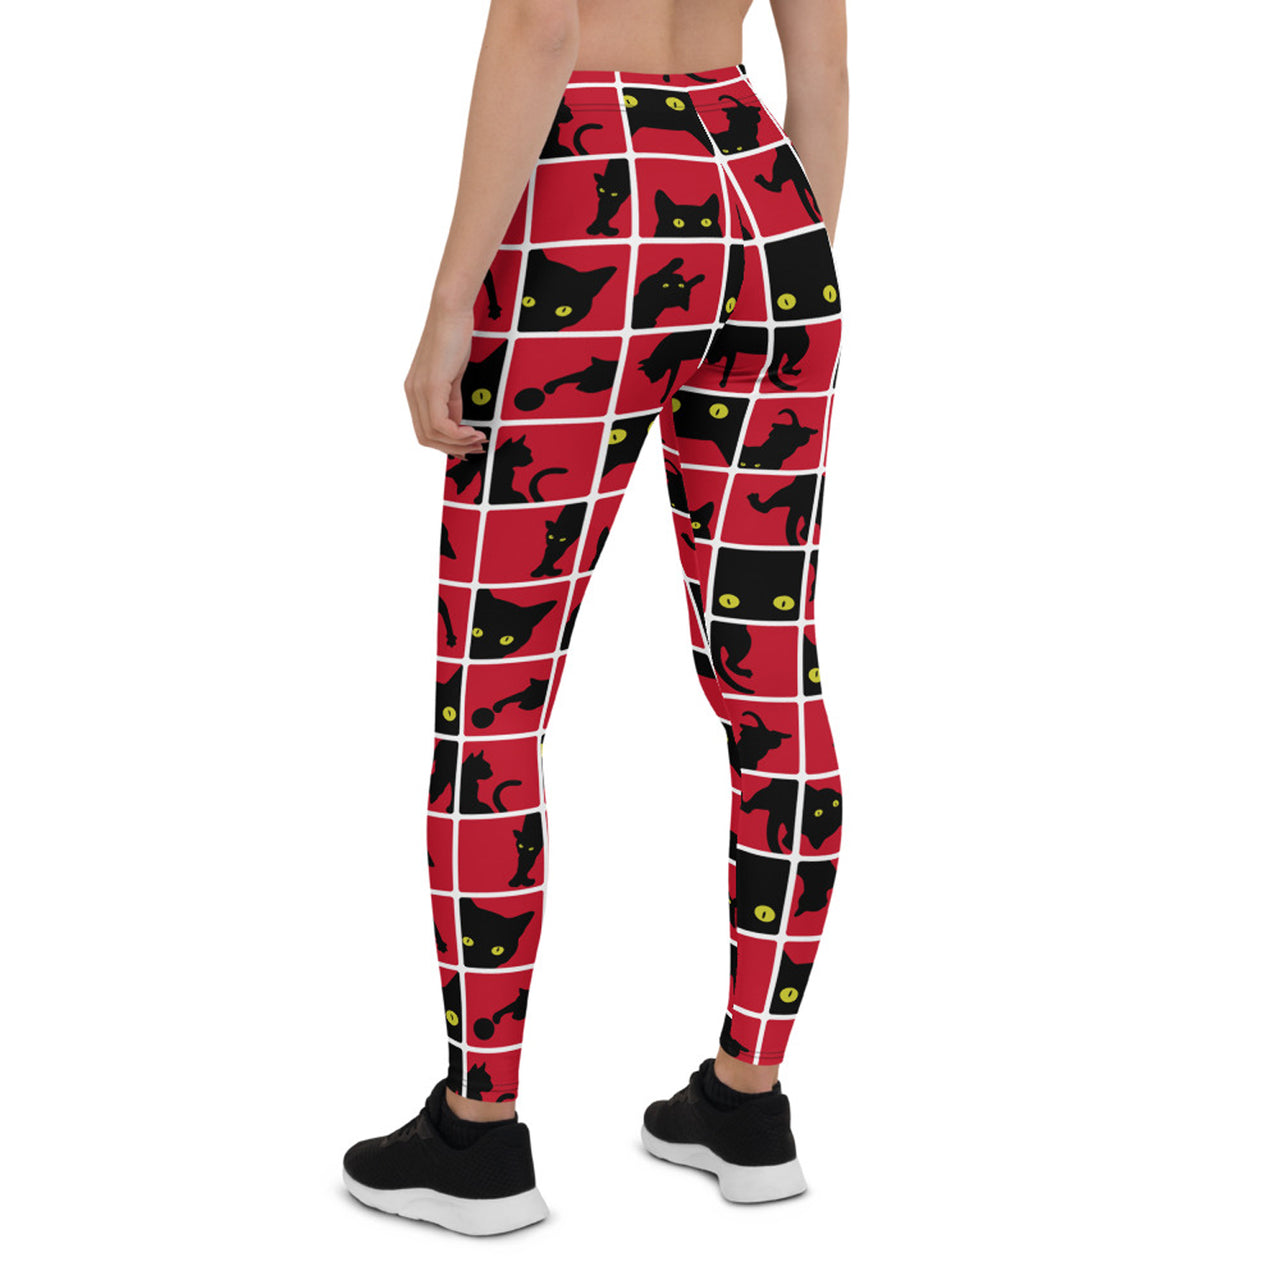 black and red leggings with cat pattern